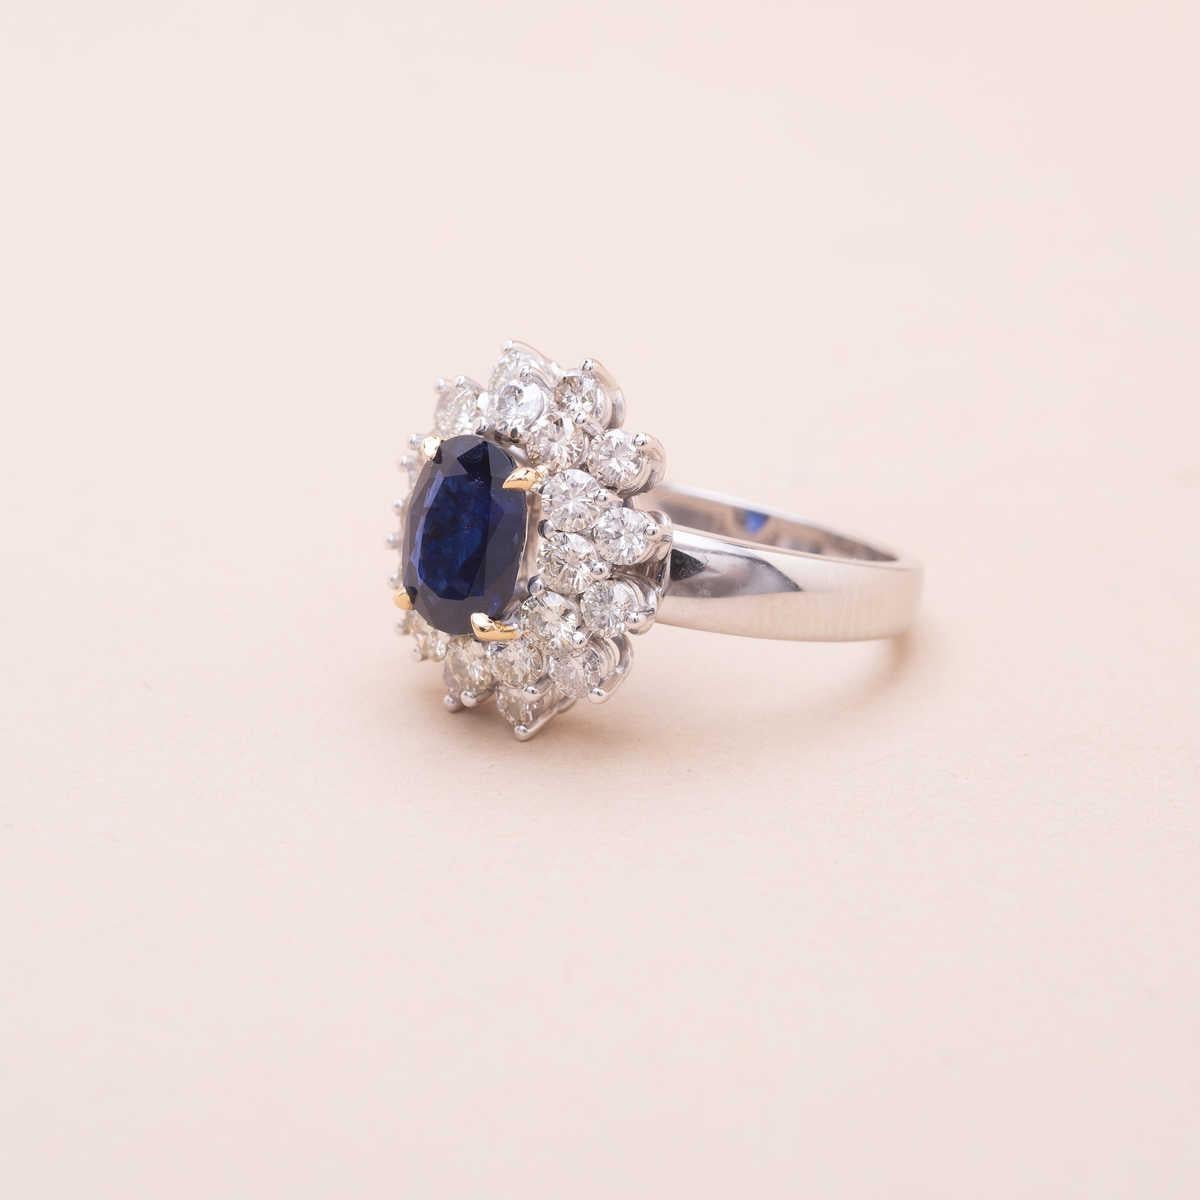 18K white gold 1.91 carat oval-cut sapphire surrounded by a total of 1.6 carat brillant-cut diamonds 
Estimated characteristics : color G to J, purity VS 
Dimensions : 17.20x15.40mm
Ring size (adjustable on demand) : 55 FR 
Gross weight :